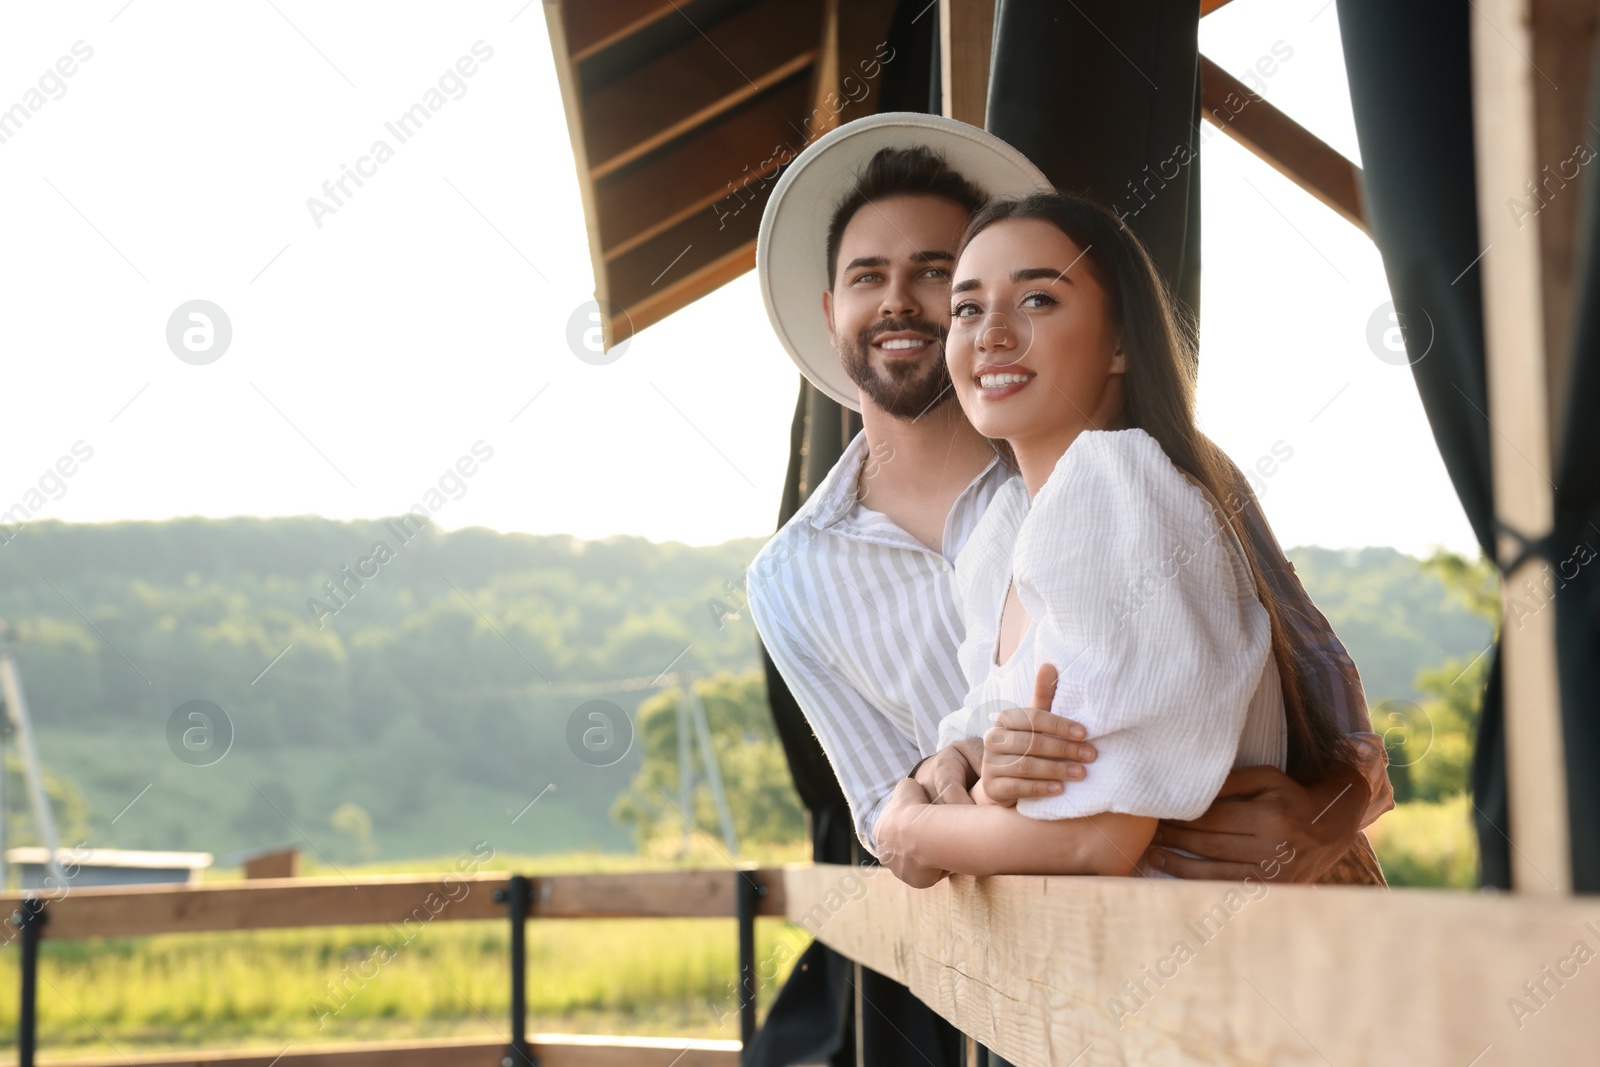 Photo of Romantic date. Beautiful couple spending time together outdoors, space for text